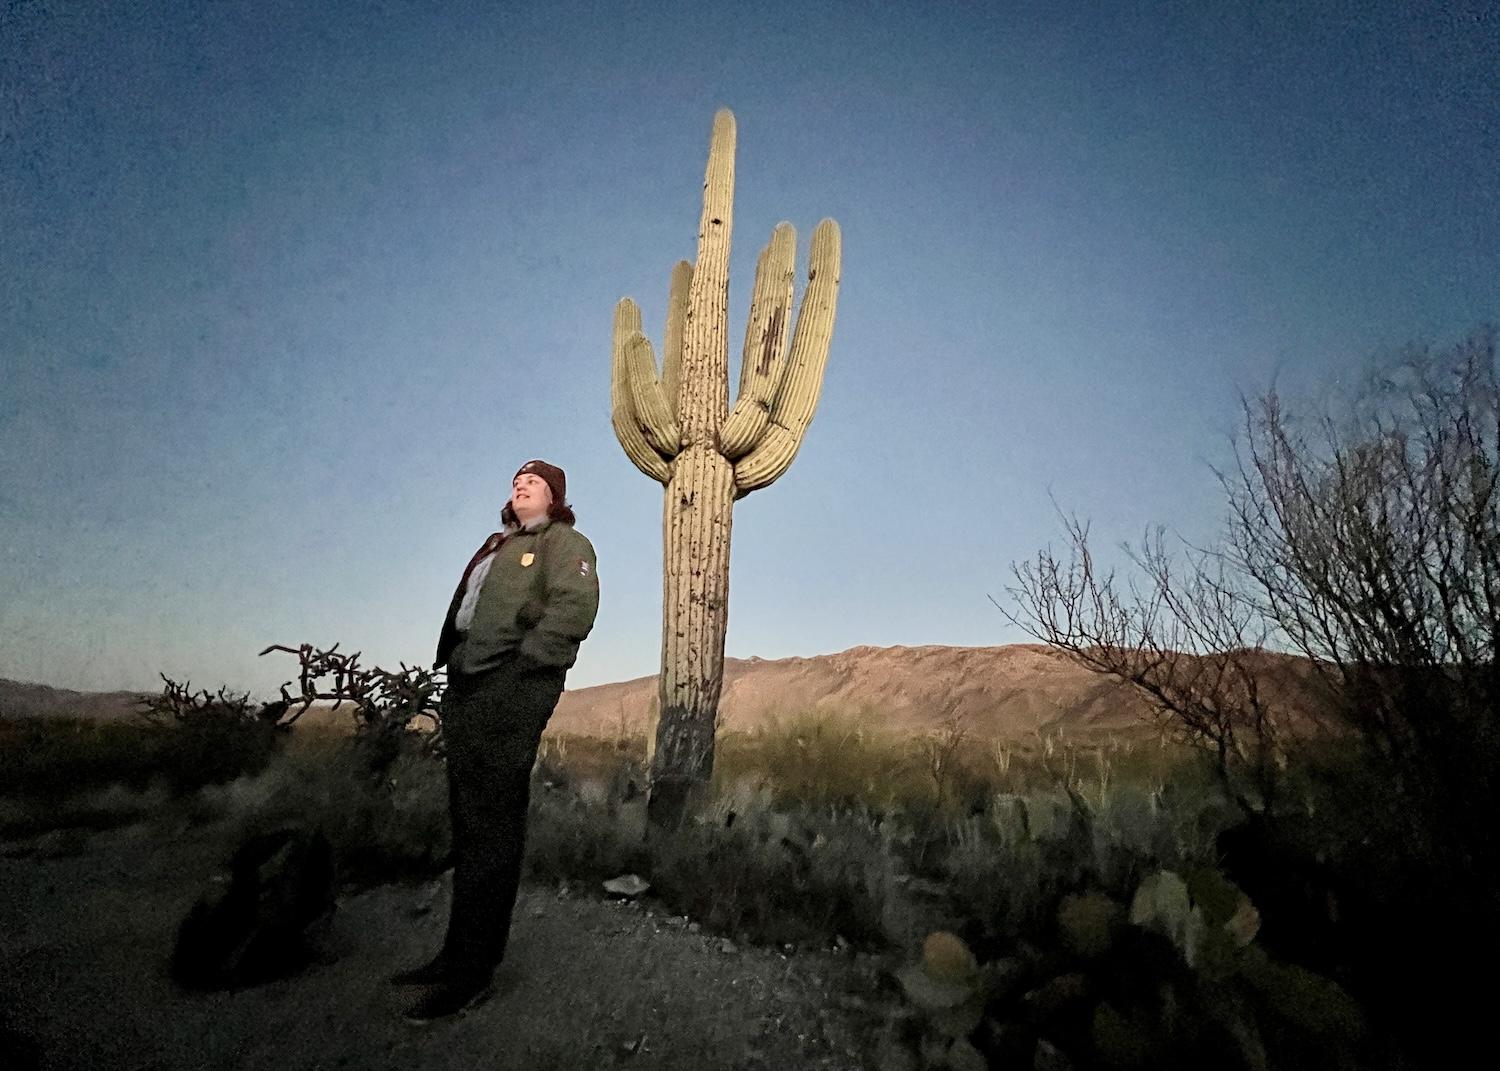 As night falls on Saguaro National Park, Next Generation Ranger Malana Starr talks about the cactus forest and the night sky.